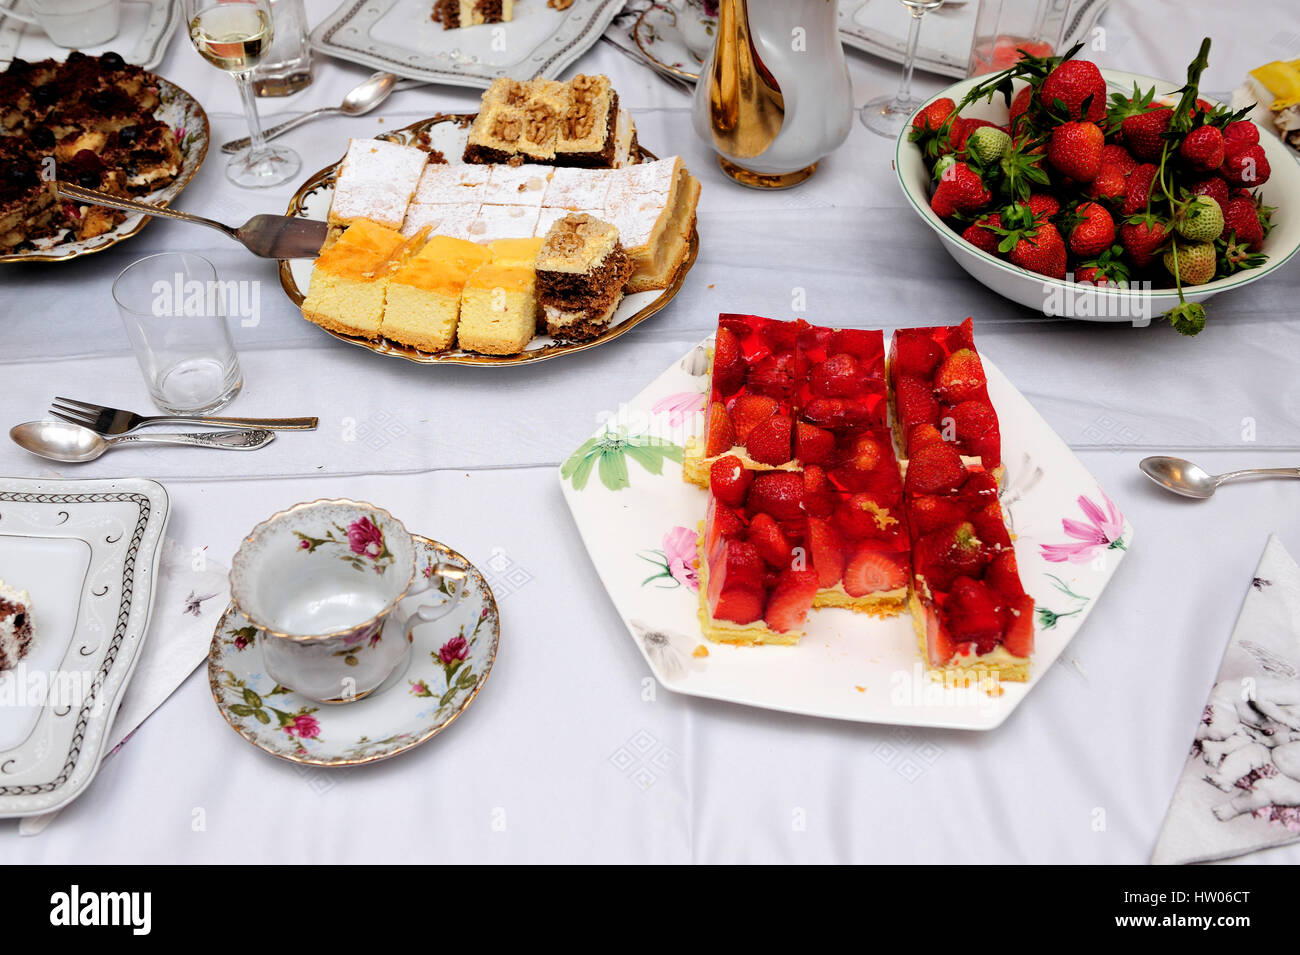 strawberry cake, treats, fruit, fresh, kitchen, preparation, meal, food, eating, kitchen, natural, home-made, baked goods, table, celebration, Stock Photo